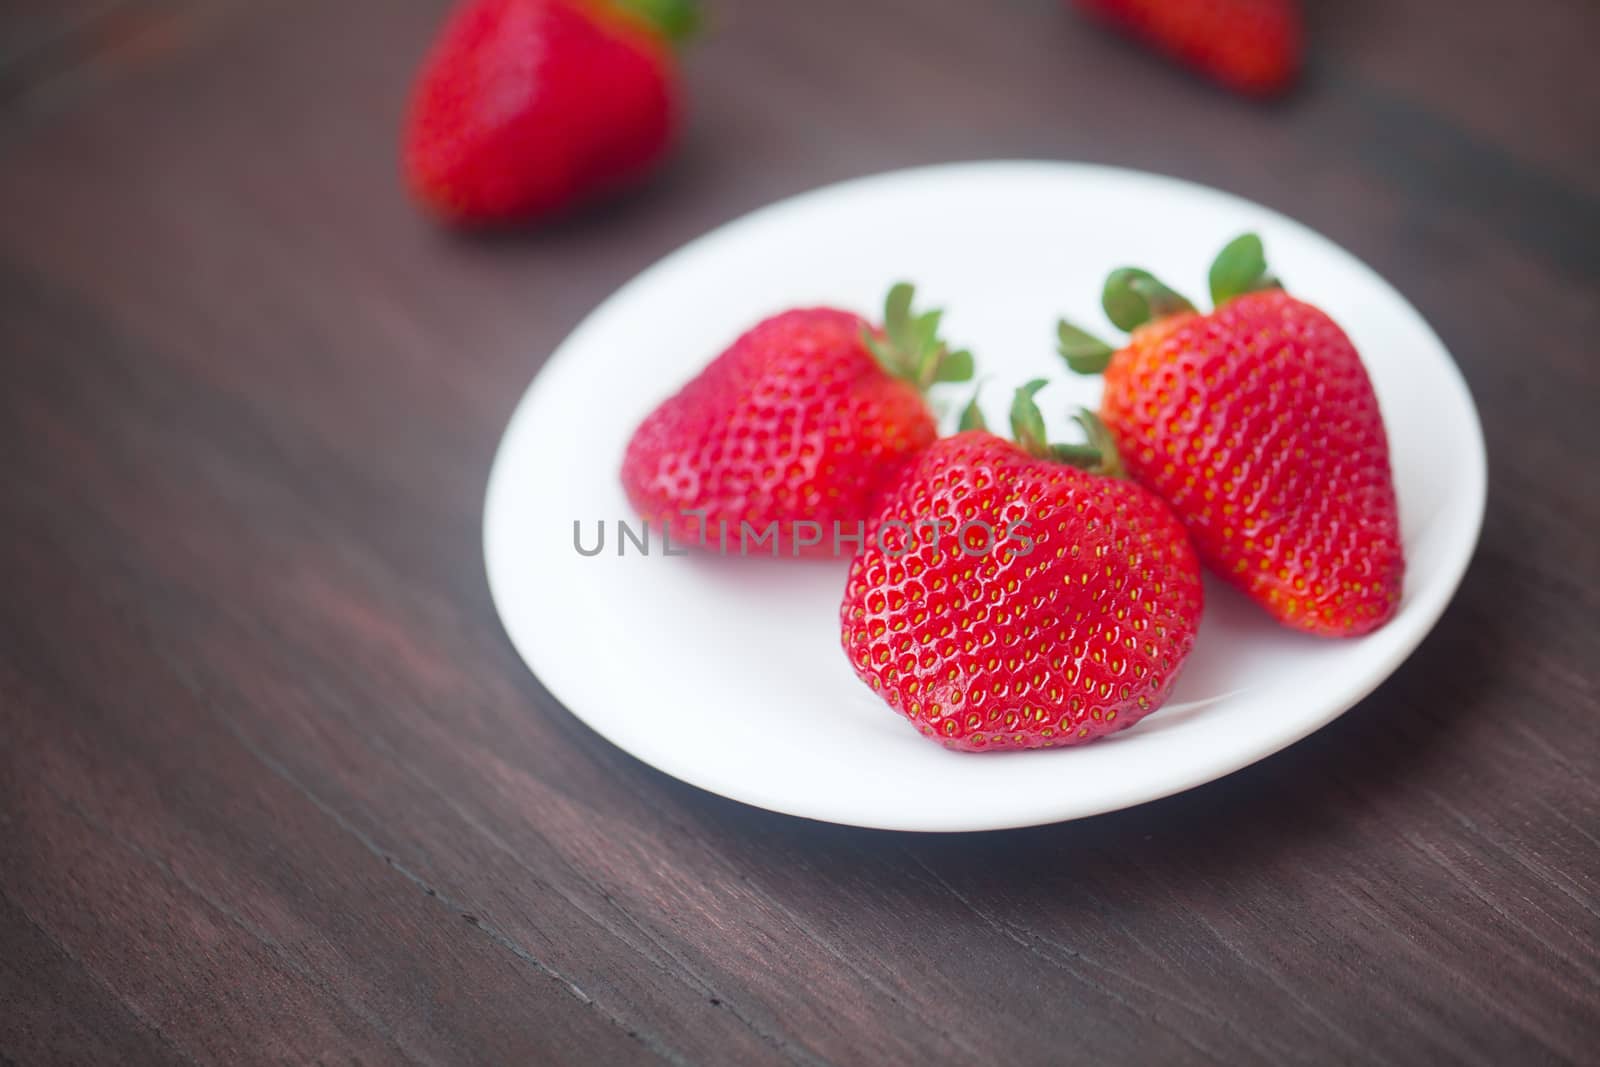 red juicy strawberry in a plate on a wooden surface by jannyjus